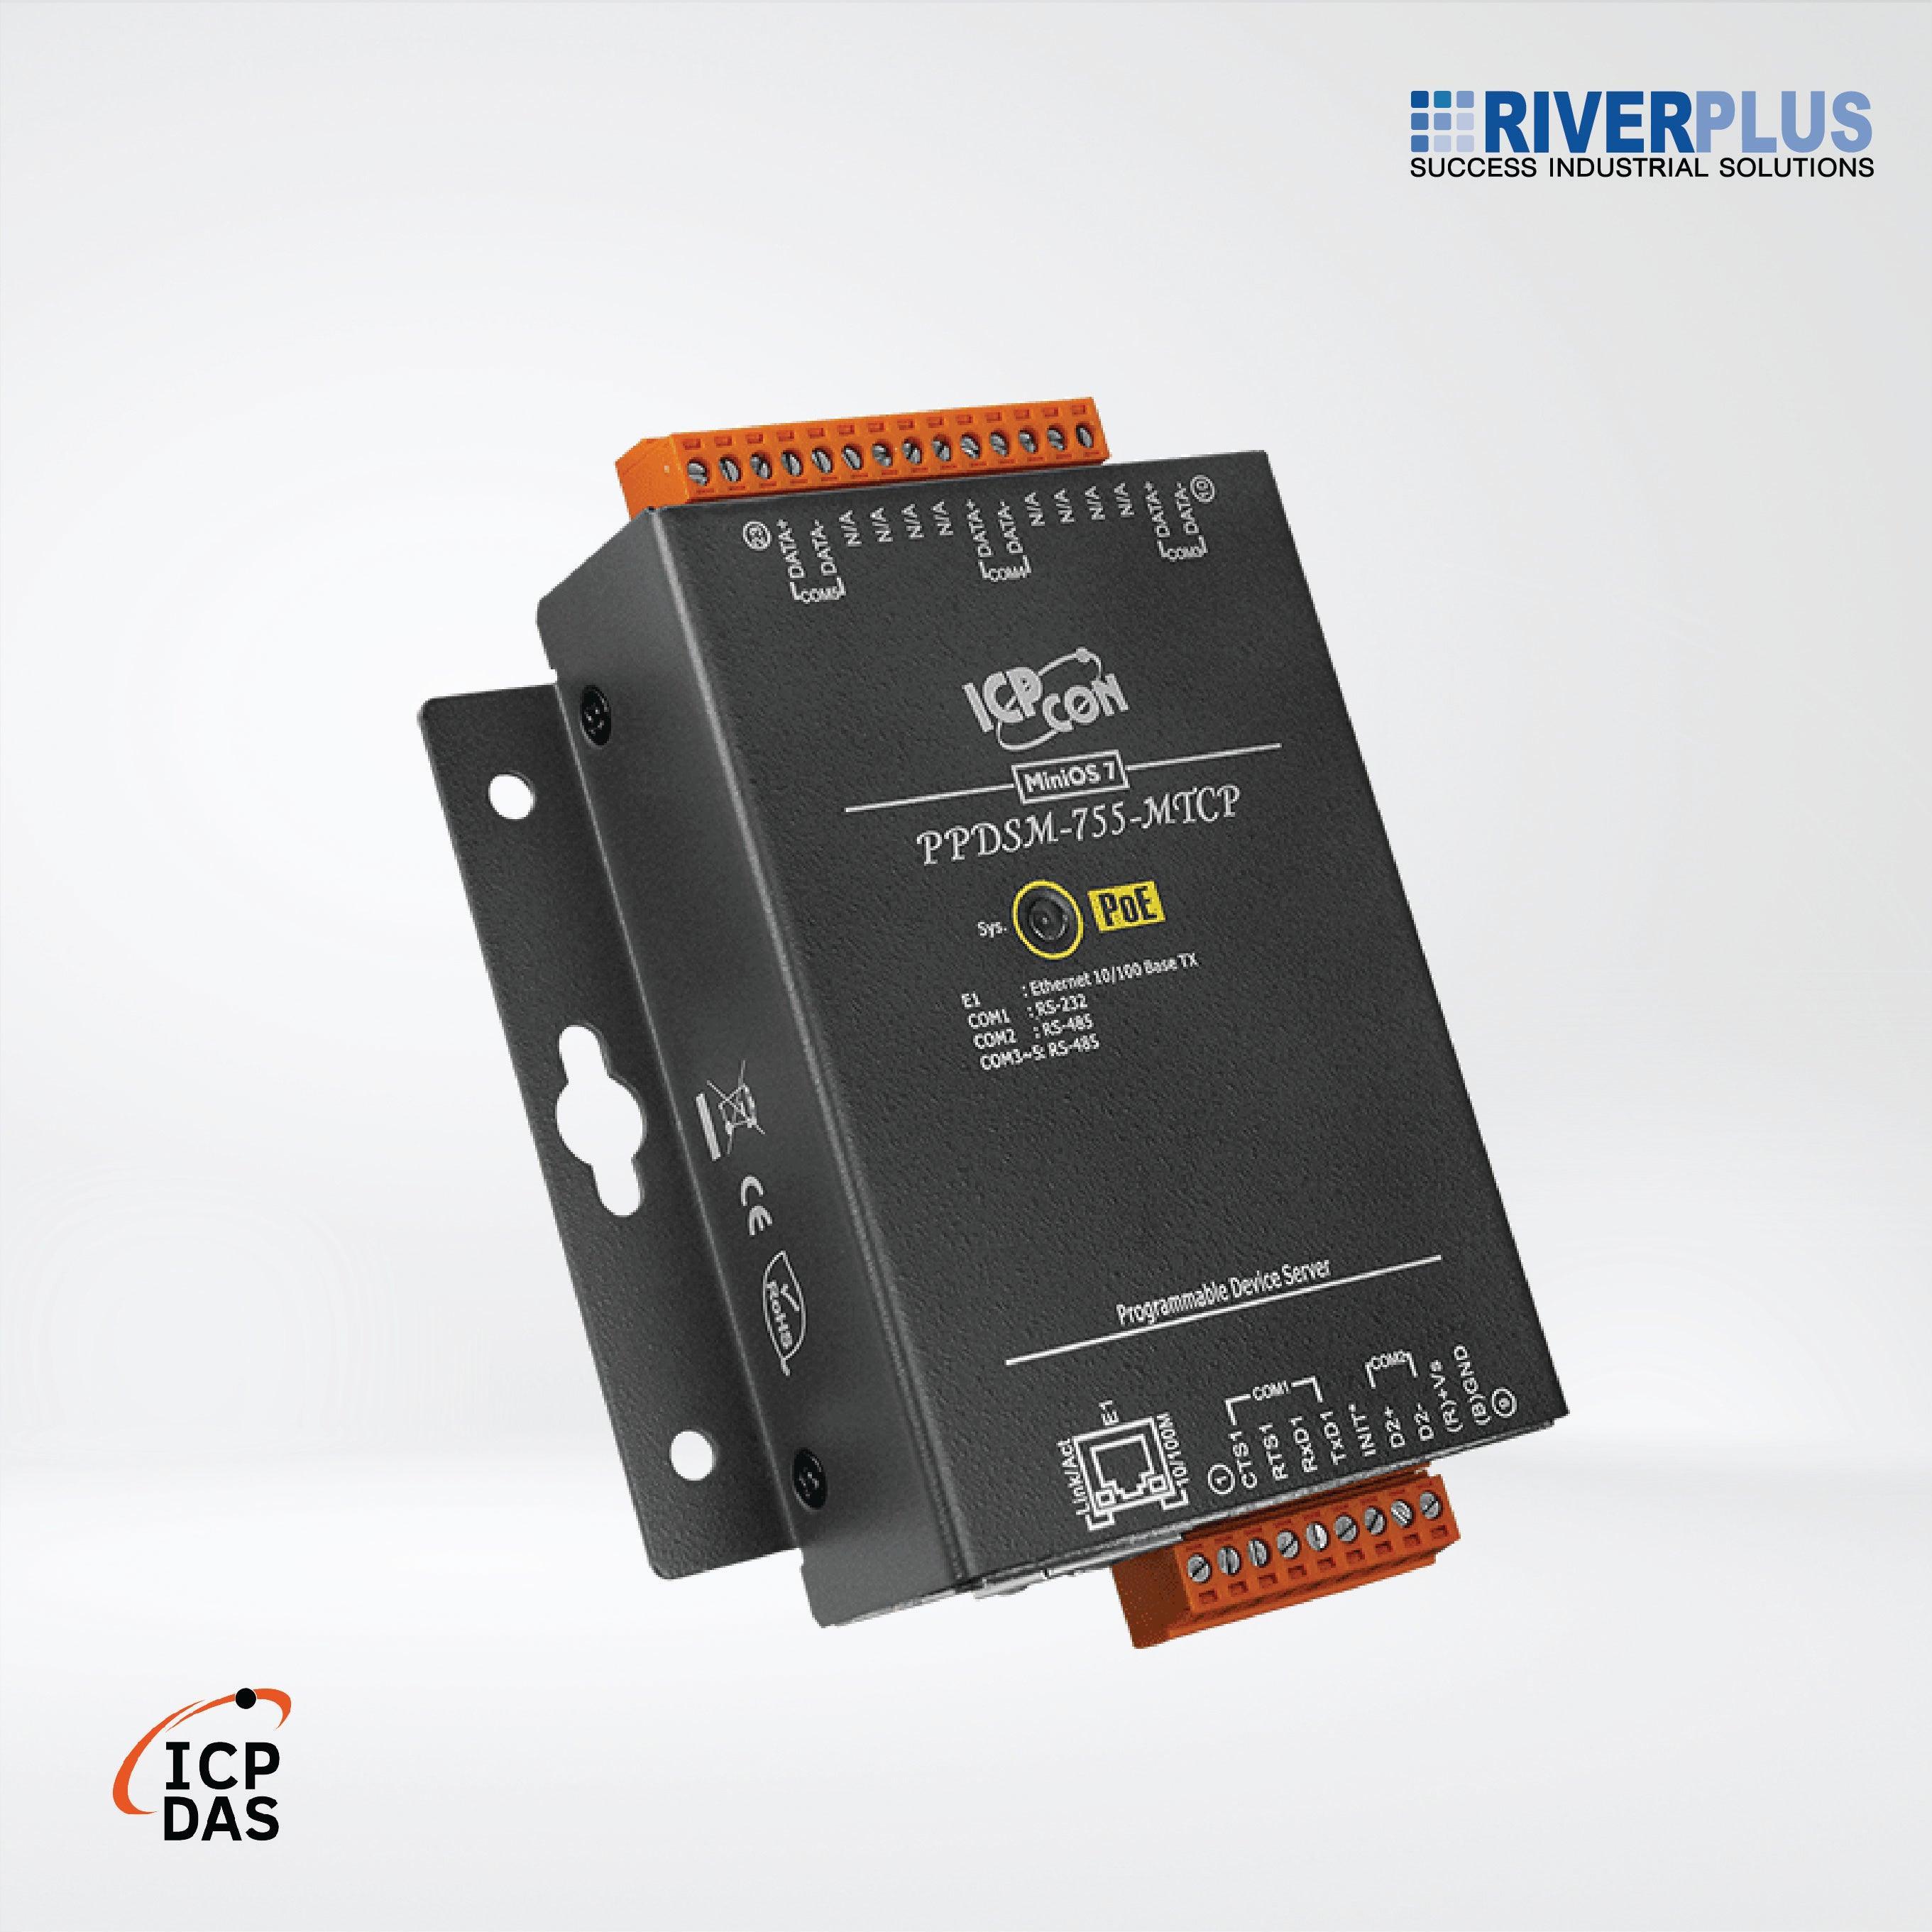 PPDSM-755-MTCP Programmable (1x RS-232 and 4x RS-485) Serial-to-Ethernet Device Server - Riverplus